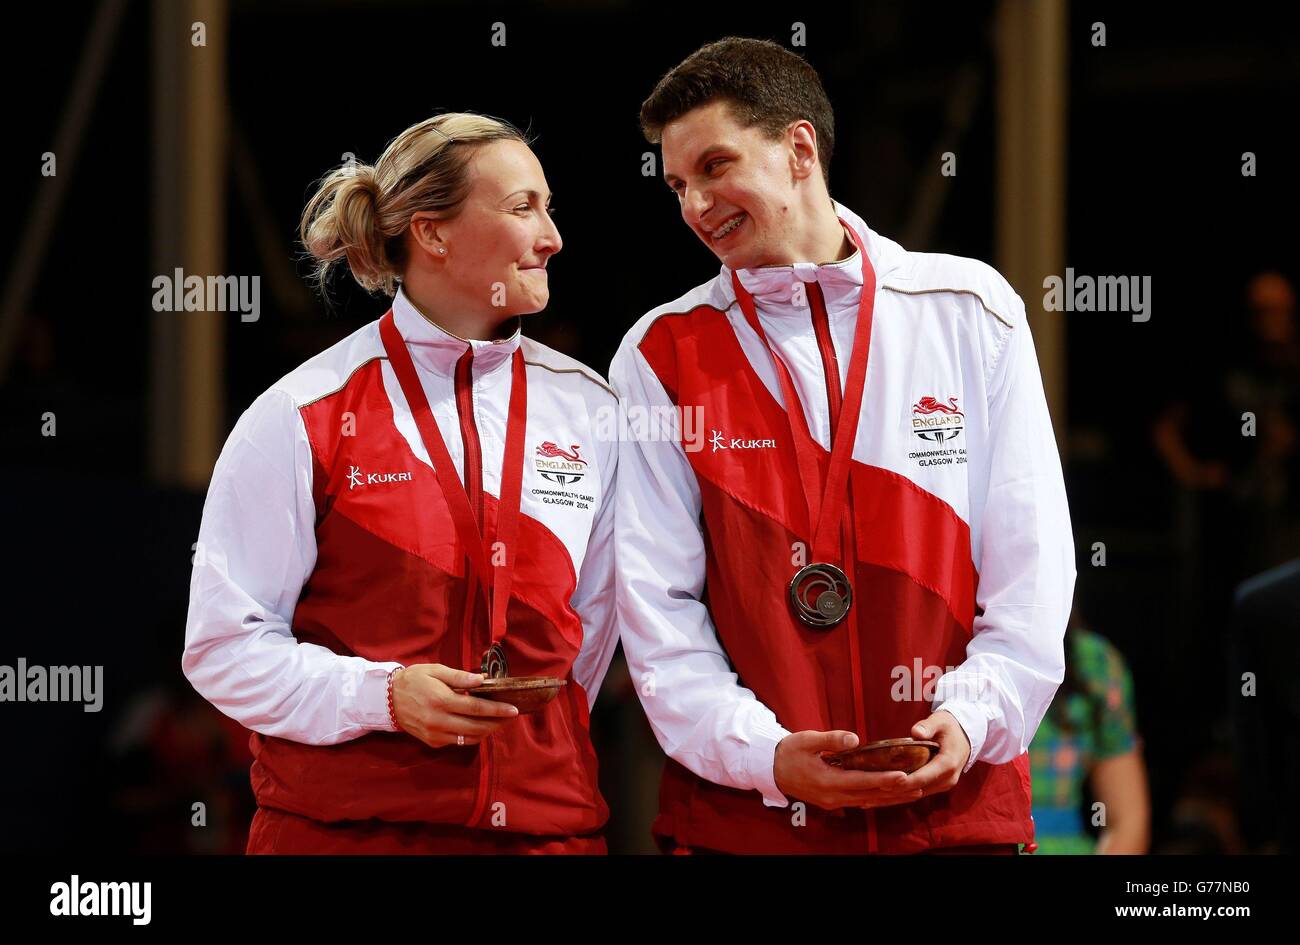 England's Kelly Sibley and Danny Reed with their bronze medals won in the Mixed Doubles Table Tennis Bronze Medal match at Scotstoun Sports Campus, during the 2014 Commonwealth Games in Glasgow. Stock Photo